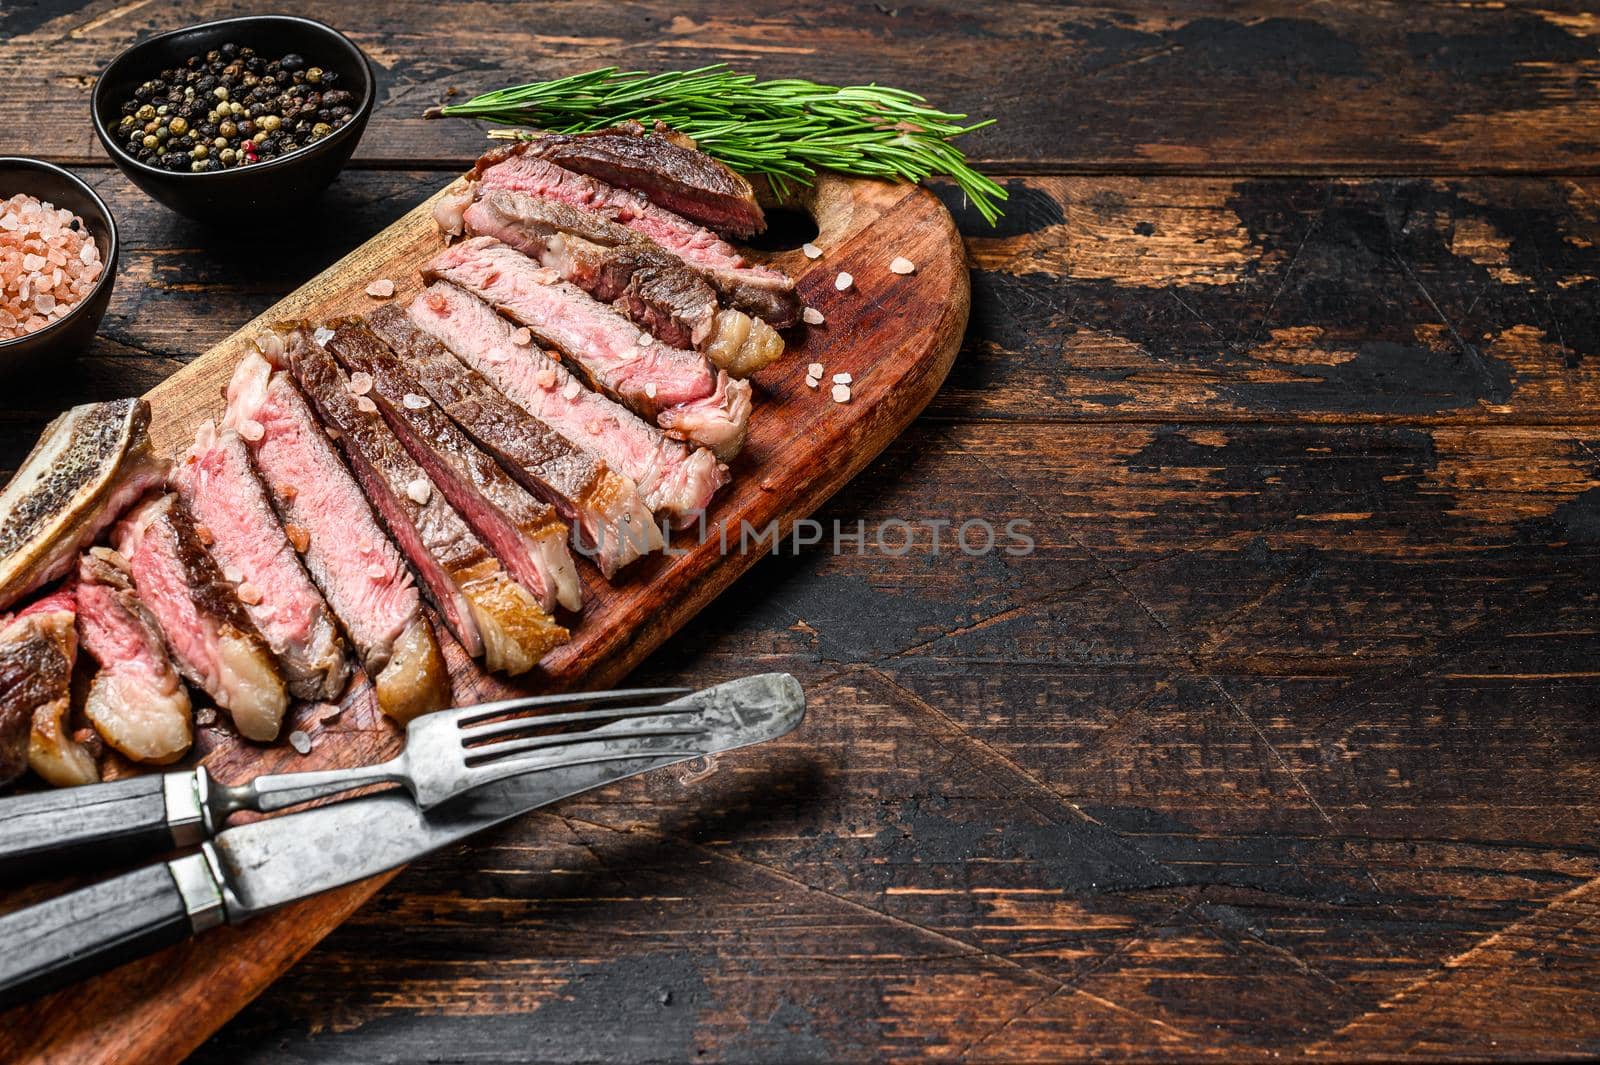 Ribeye steak on the bone. Grilled Beef meat. Wooden dark background. Top view. Copy space by Composter